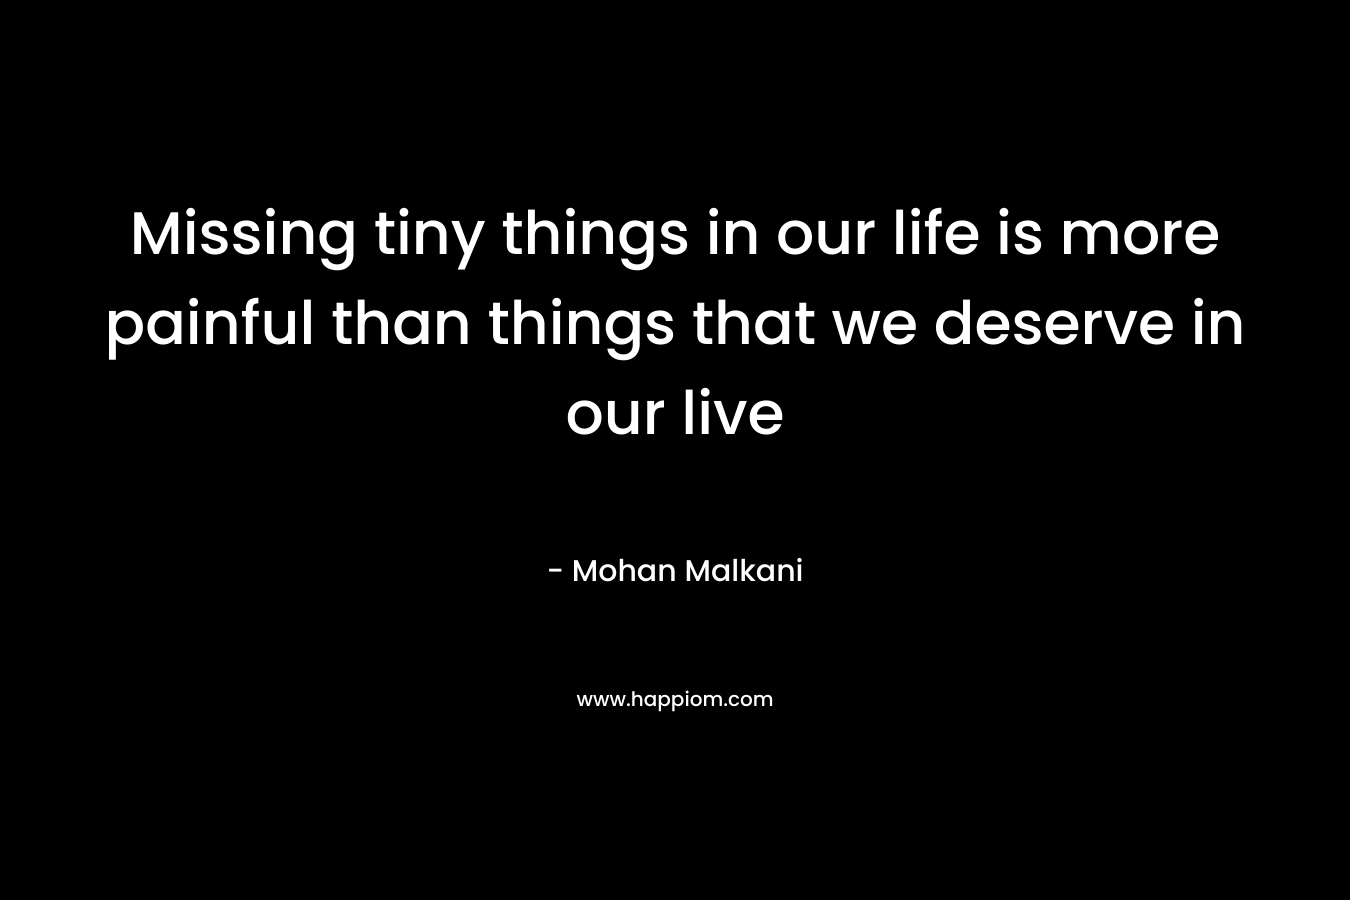 Missing tiny things in our life is more painful than things that we deserve in our live